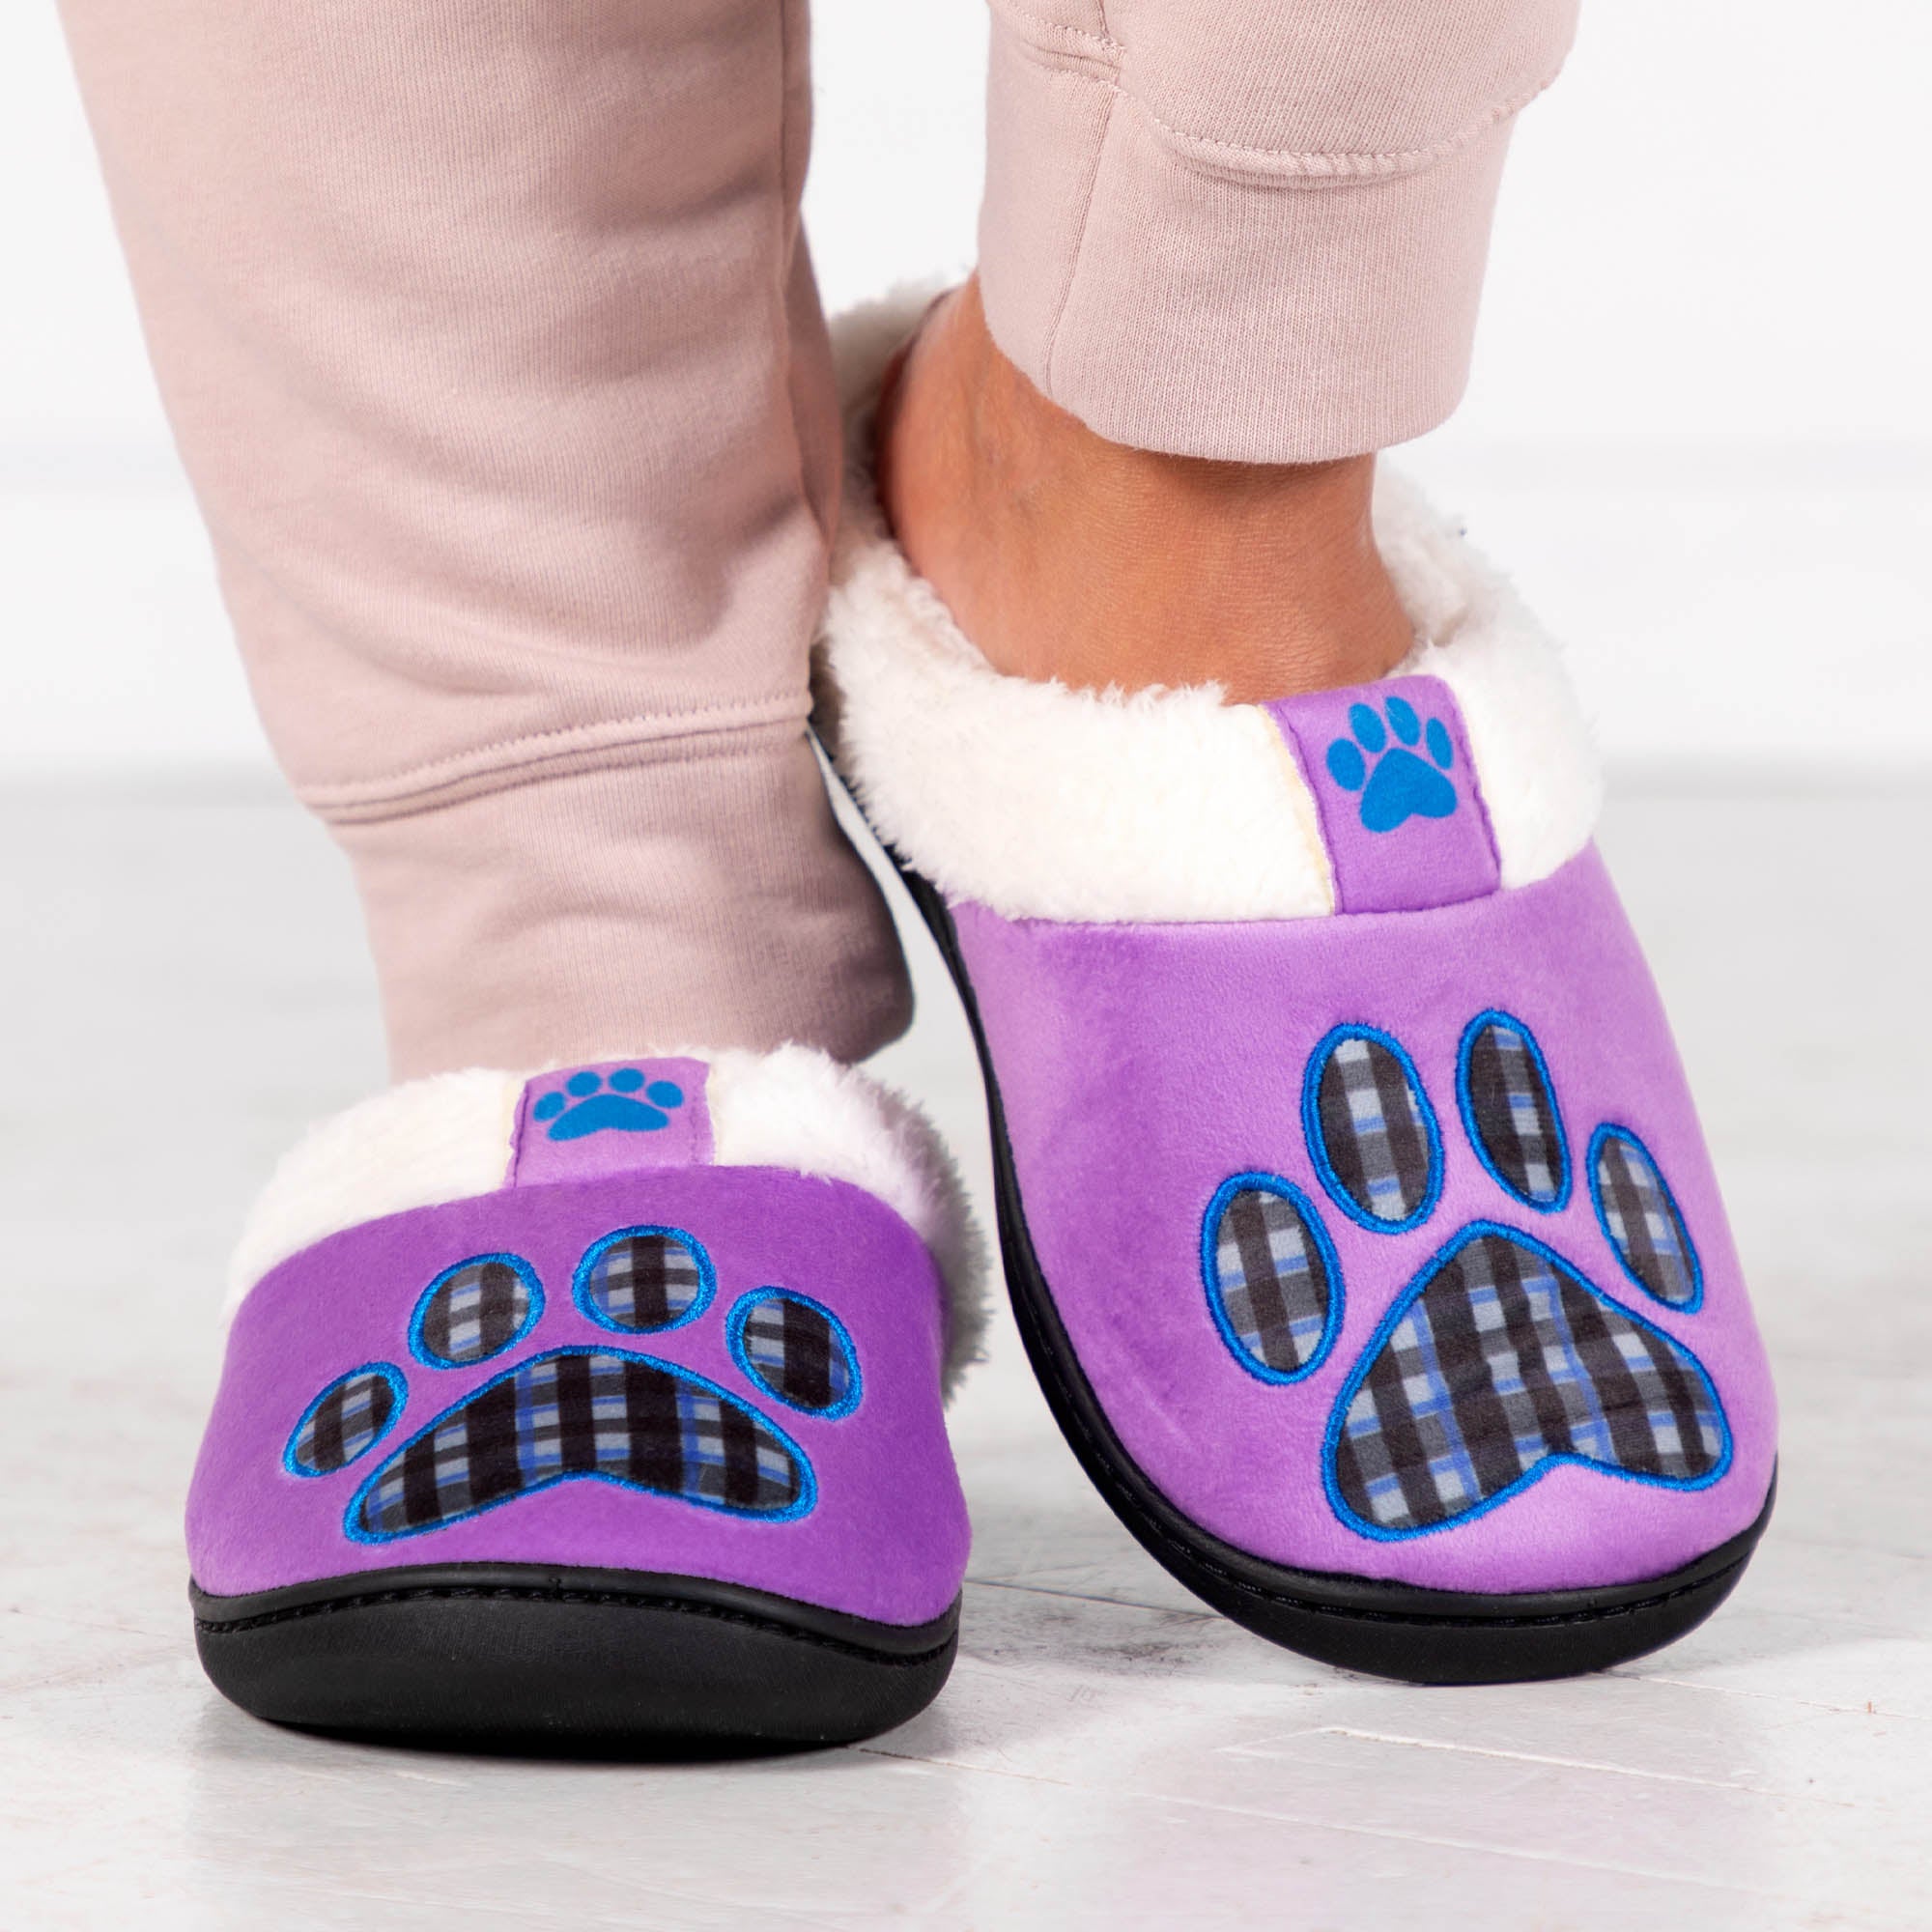 Pet Patch Slide Slippers - Paw - XL